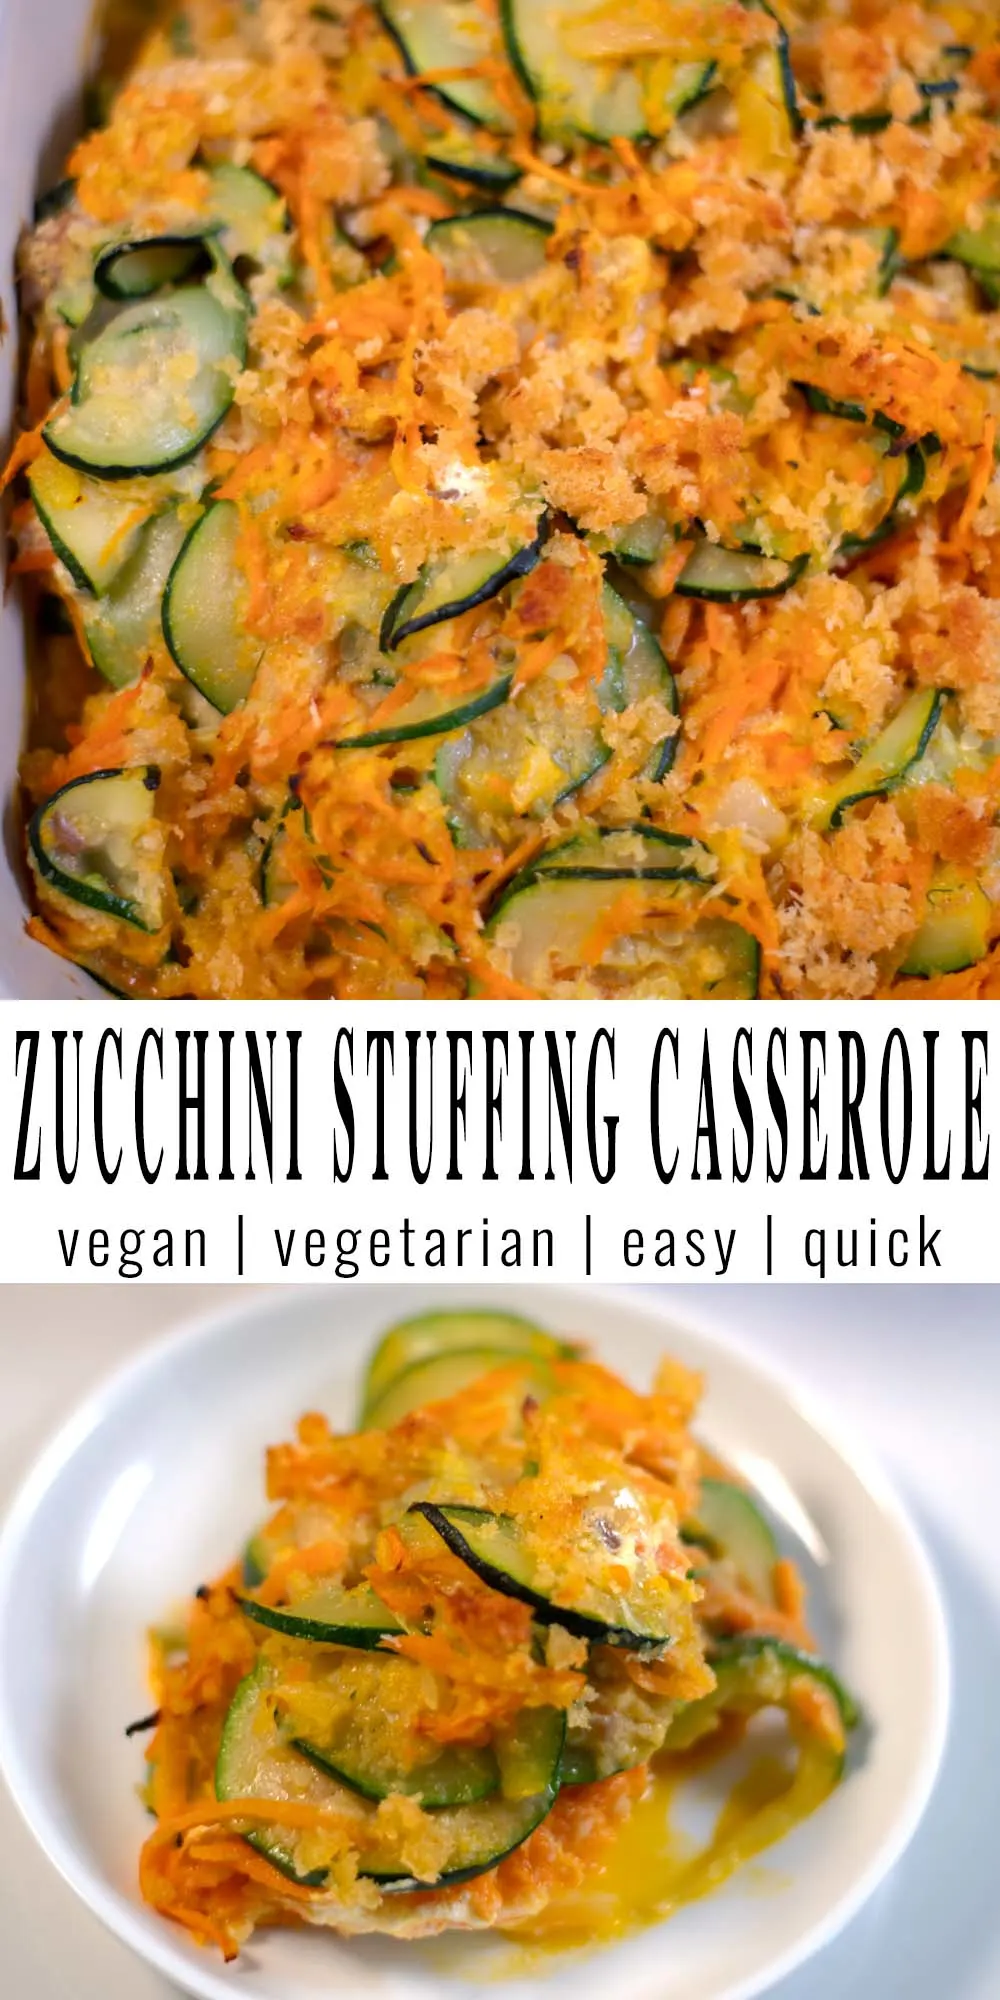 Collage of two photos of Zucchini Stuffing Casserole with recipe title text.